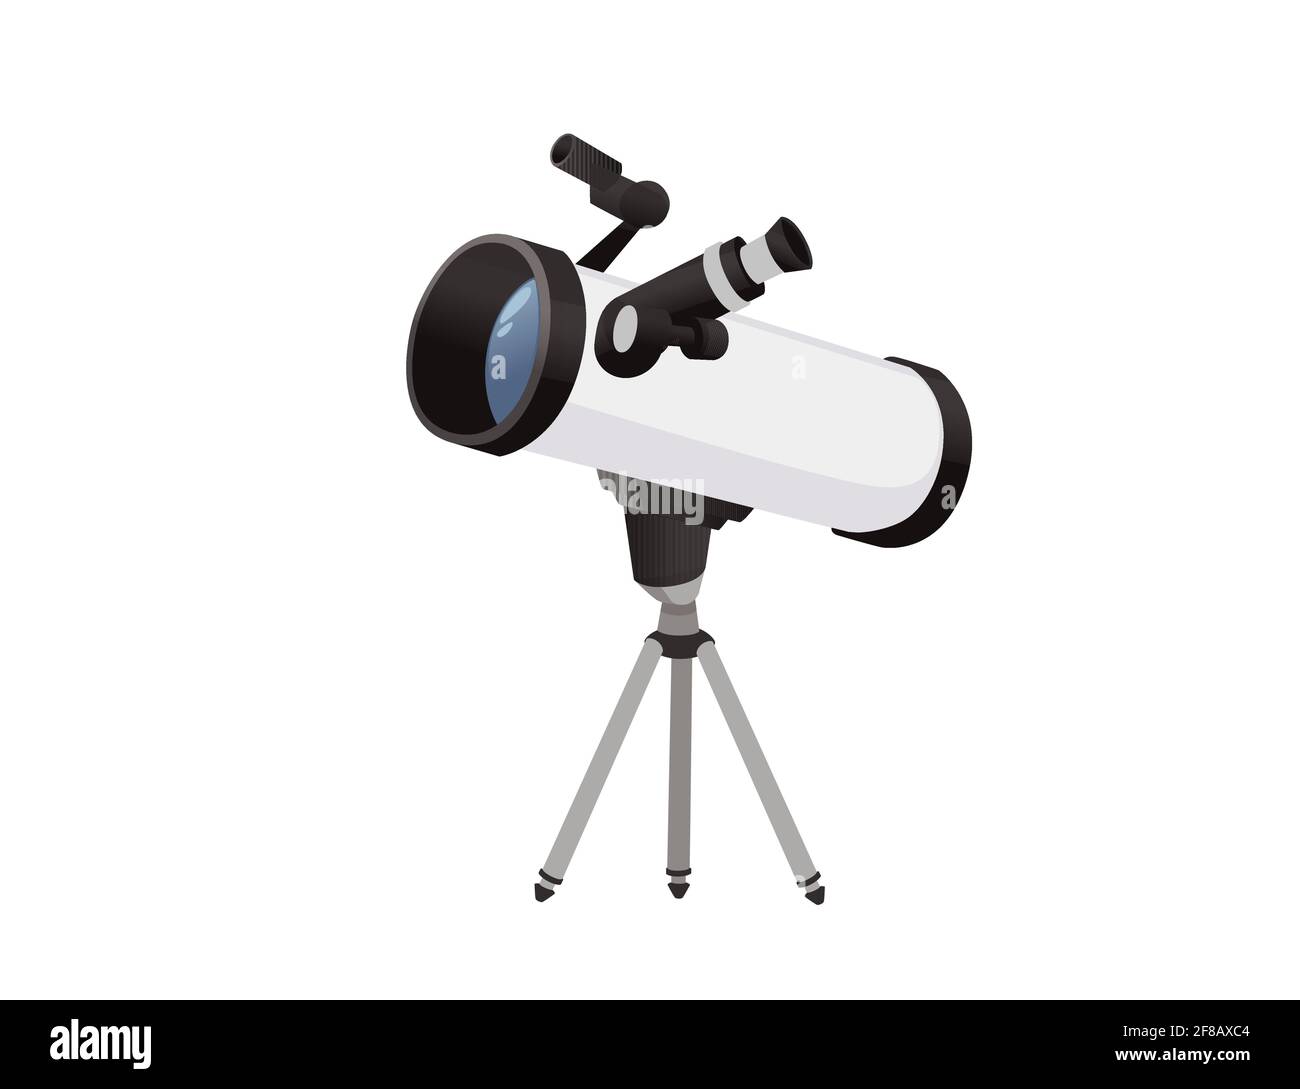 Professional optical device black and white classic reflector telescope on tripod vector illustration isolated on white background stock vector image art